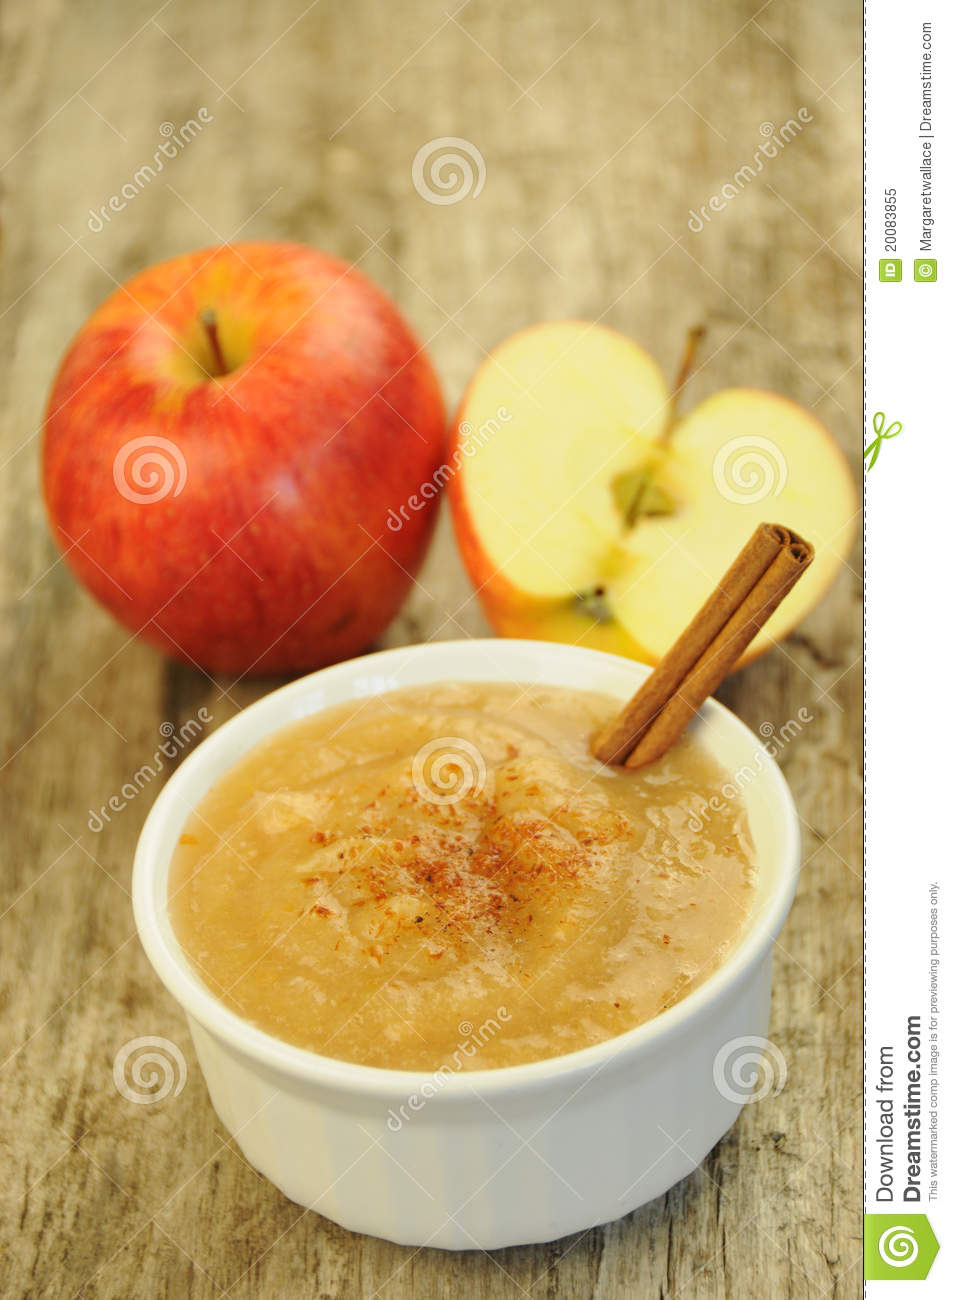 Apple Sauce Royalty Free Stoc